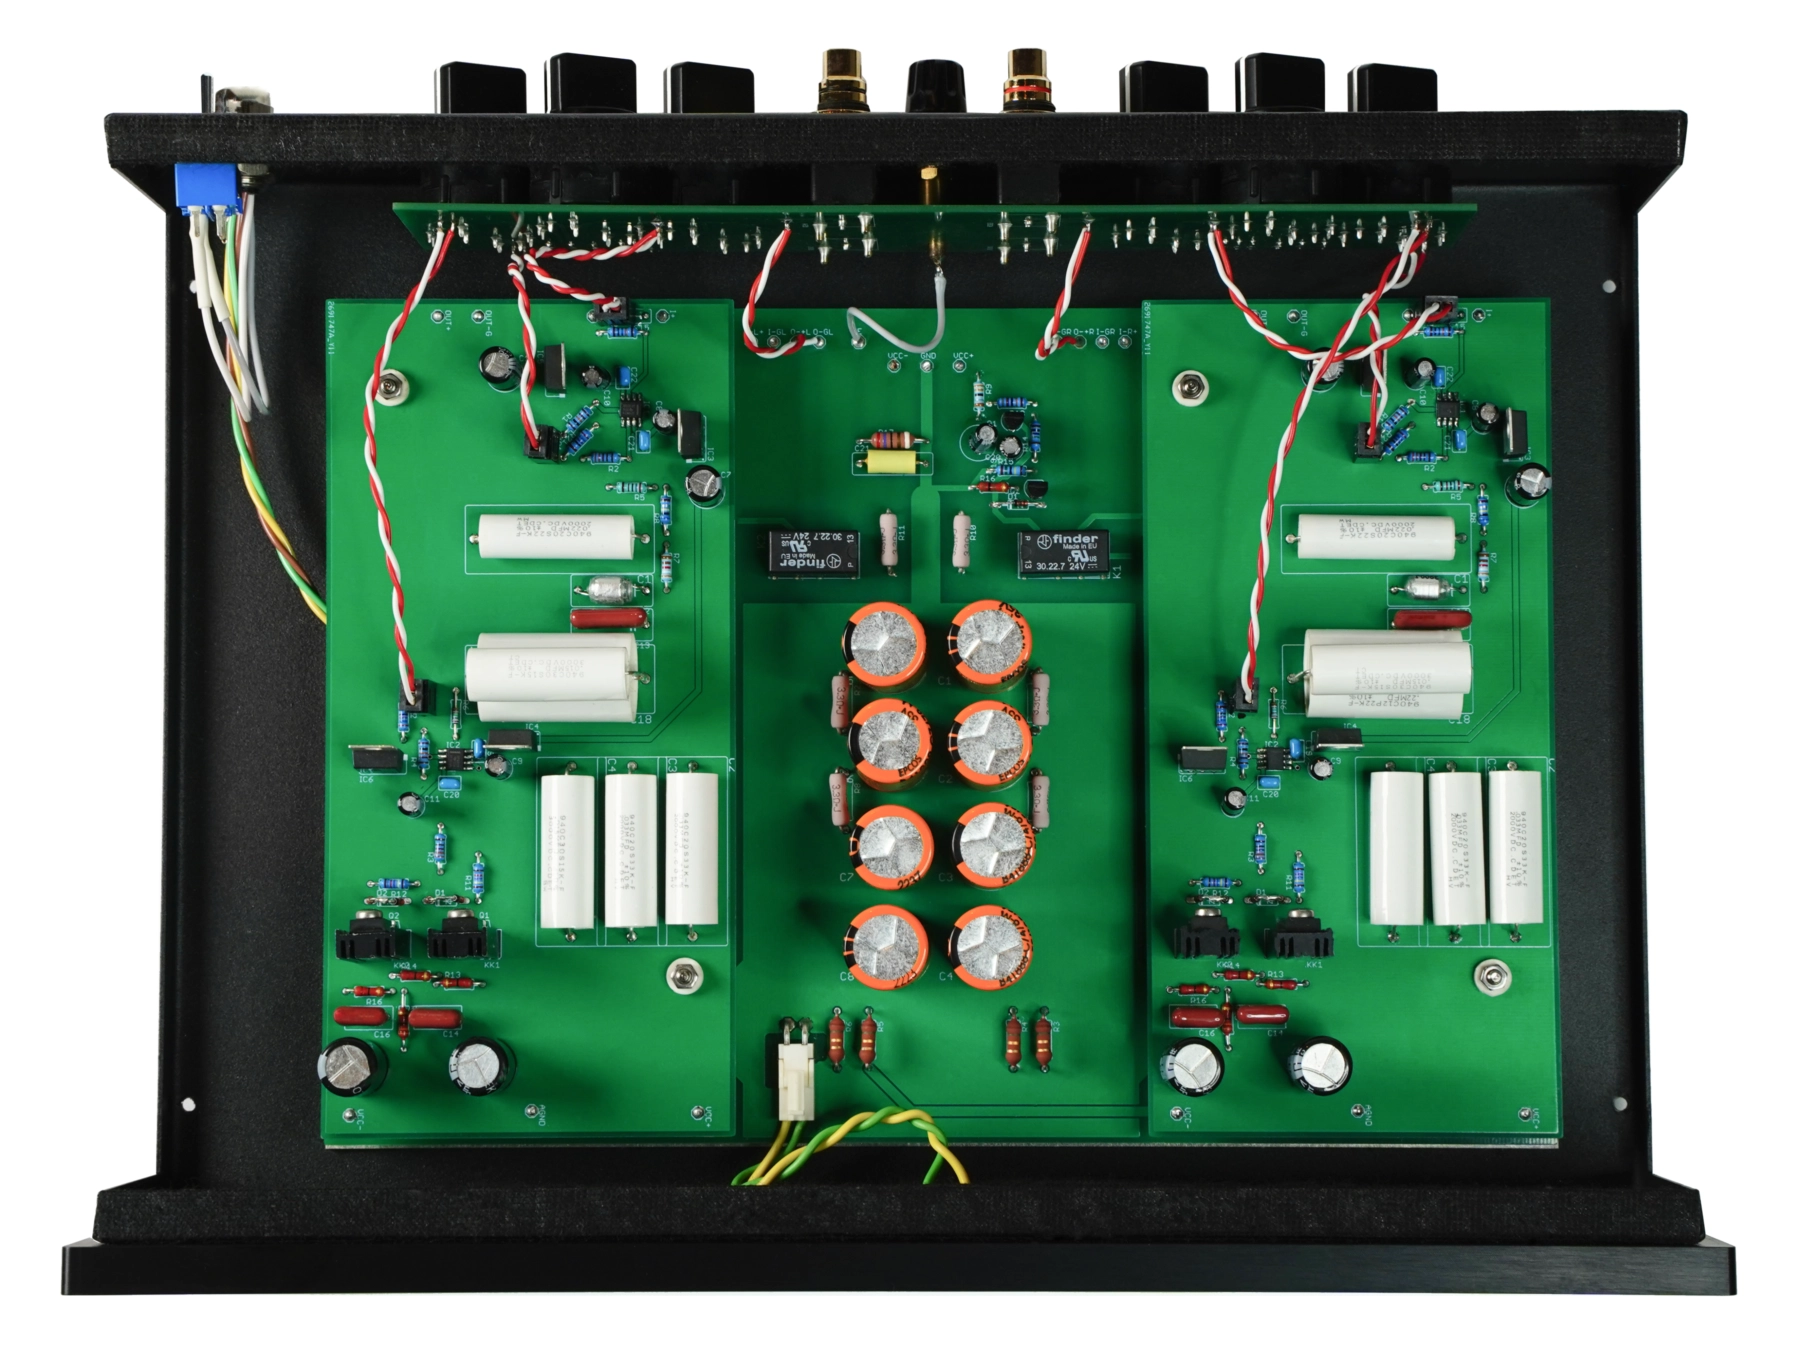 MK Analogue MM-PH-AMP interior view with dual mono architecture